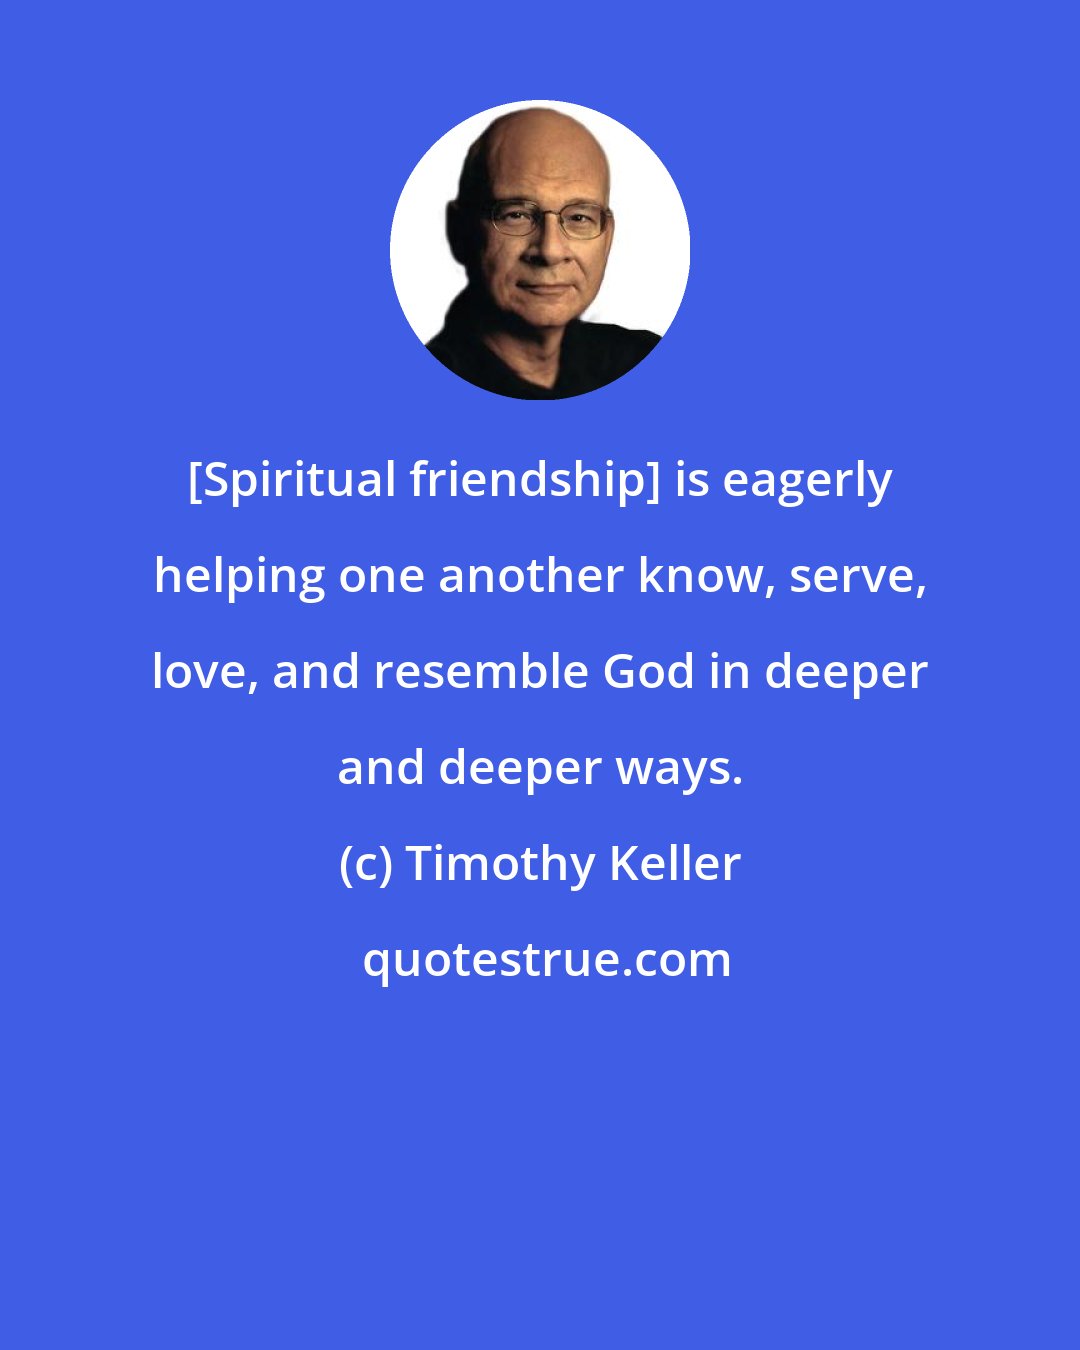 Timothy Keller: [Spiritual friendship] is eagerly helping one another know, serve, love, and resemble God in deeper and deeper ways.